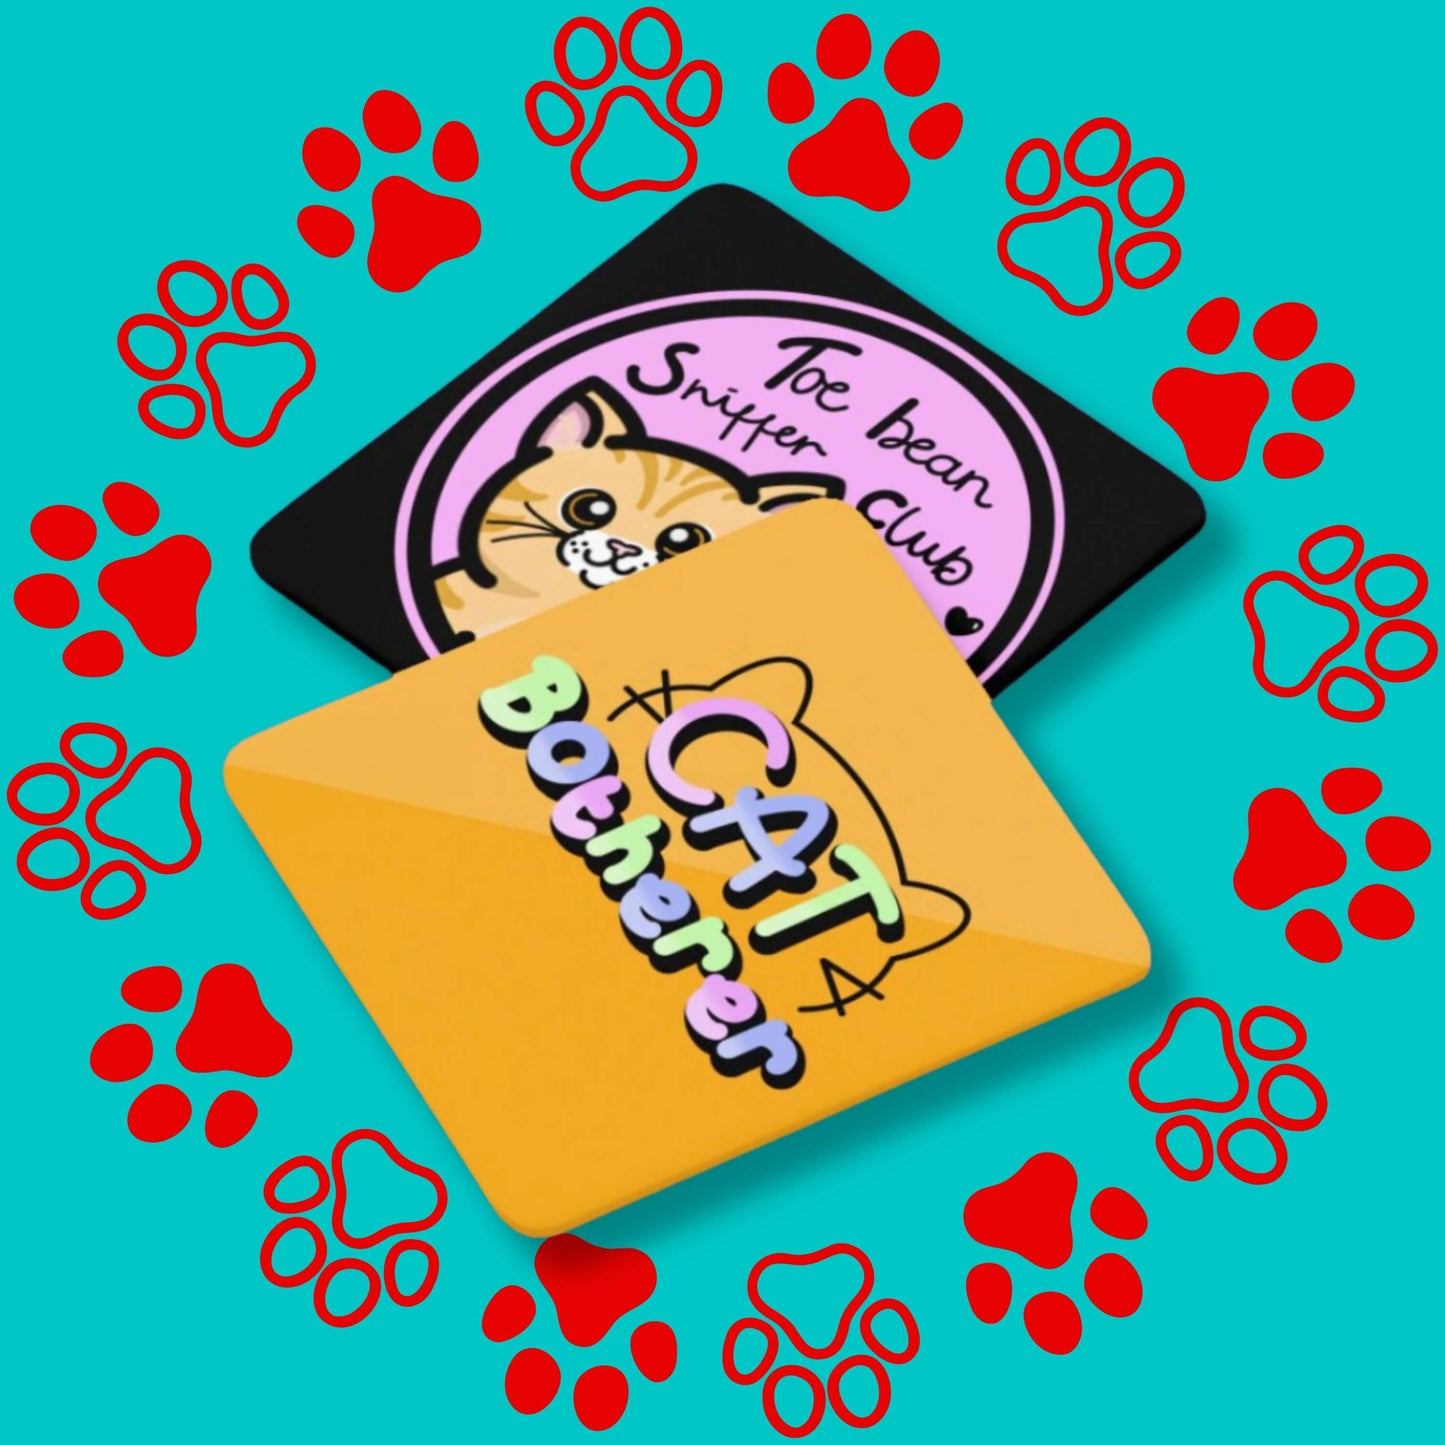 The Cat Botherer Coaster laying on the toe bean sniffer club coaster on a red and blue paw print background. The orange wooden coaster has rounded edges and pastel rainbow text reading 'cat botherer' and a black cat head outline.